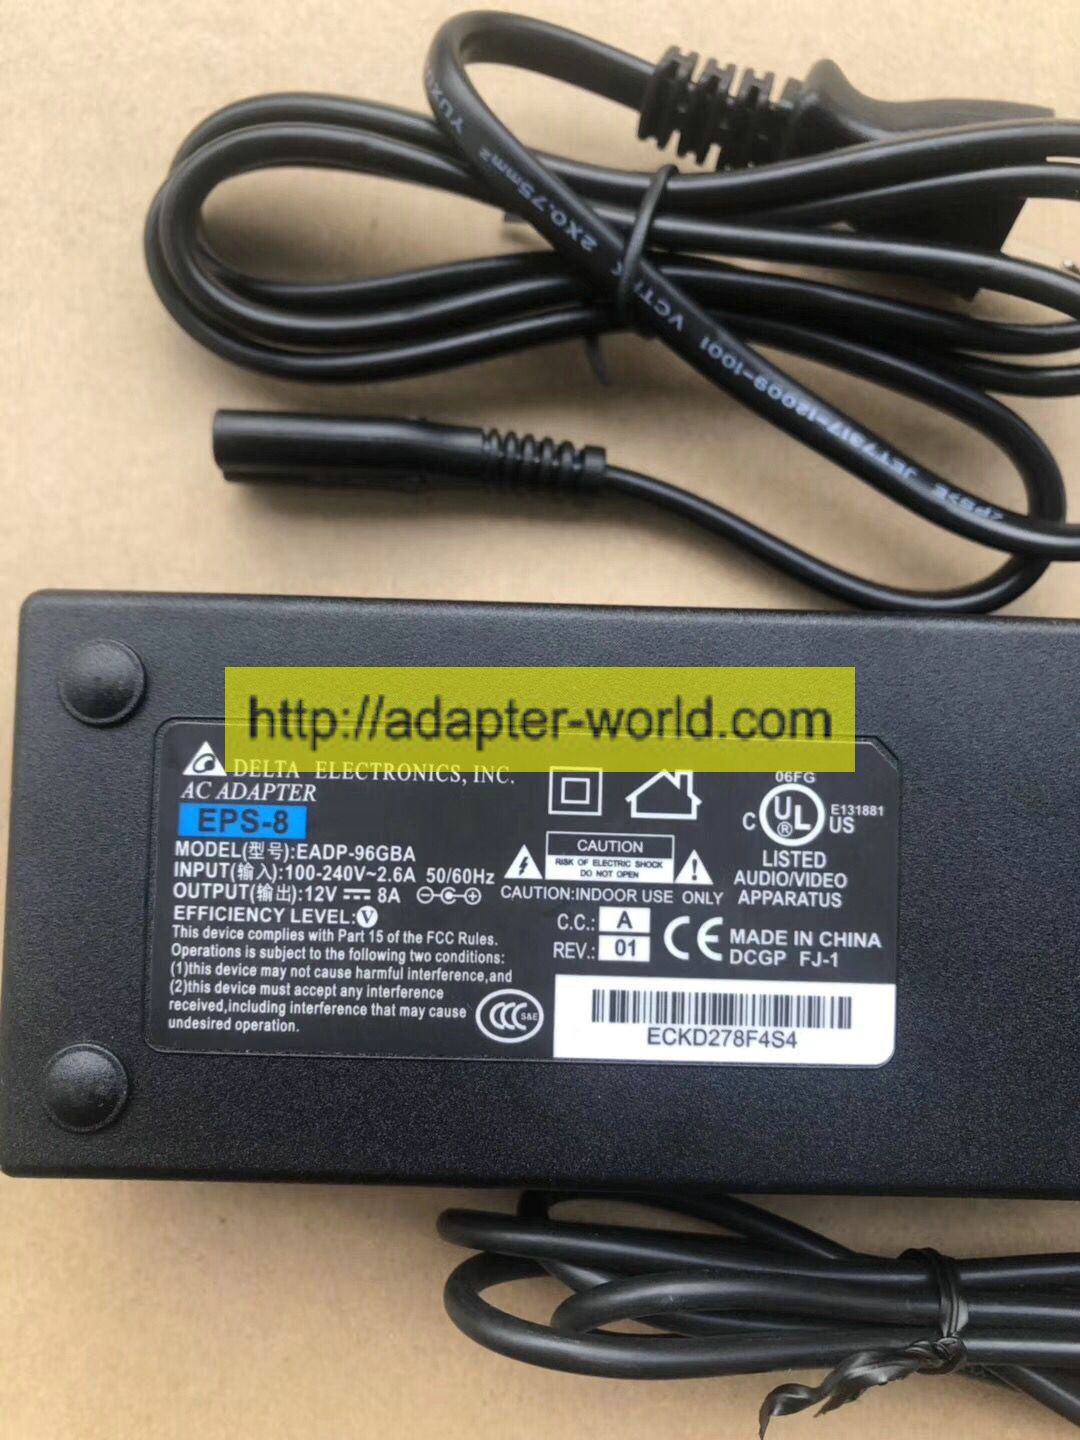 *100% Brand NEW* DELTA EADP-96GBA 12V DC 8A Switching AC ADAPTOR Power Adapter - Click Image to Close